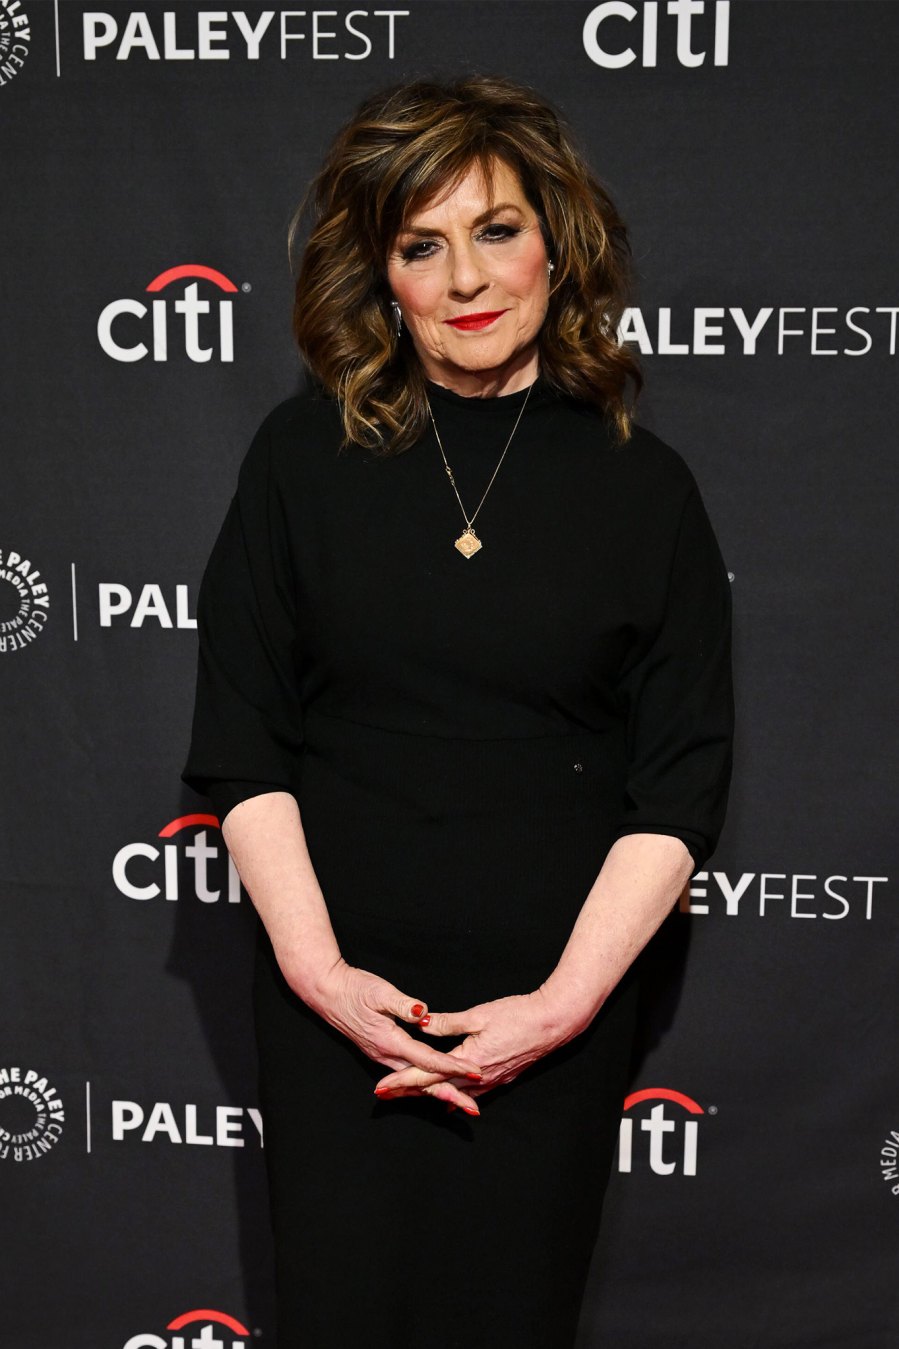 Evervthing 'The Marvelous Mrs. Maisel' Cast Has Said About the Final Season and Saving Goodbye to the Series - 796 Caroline Aaron